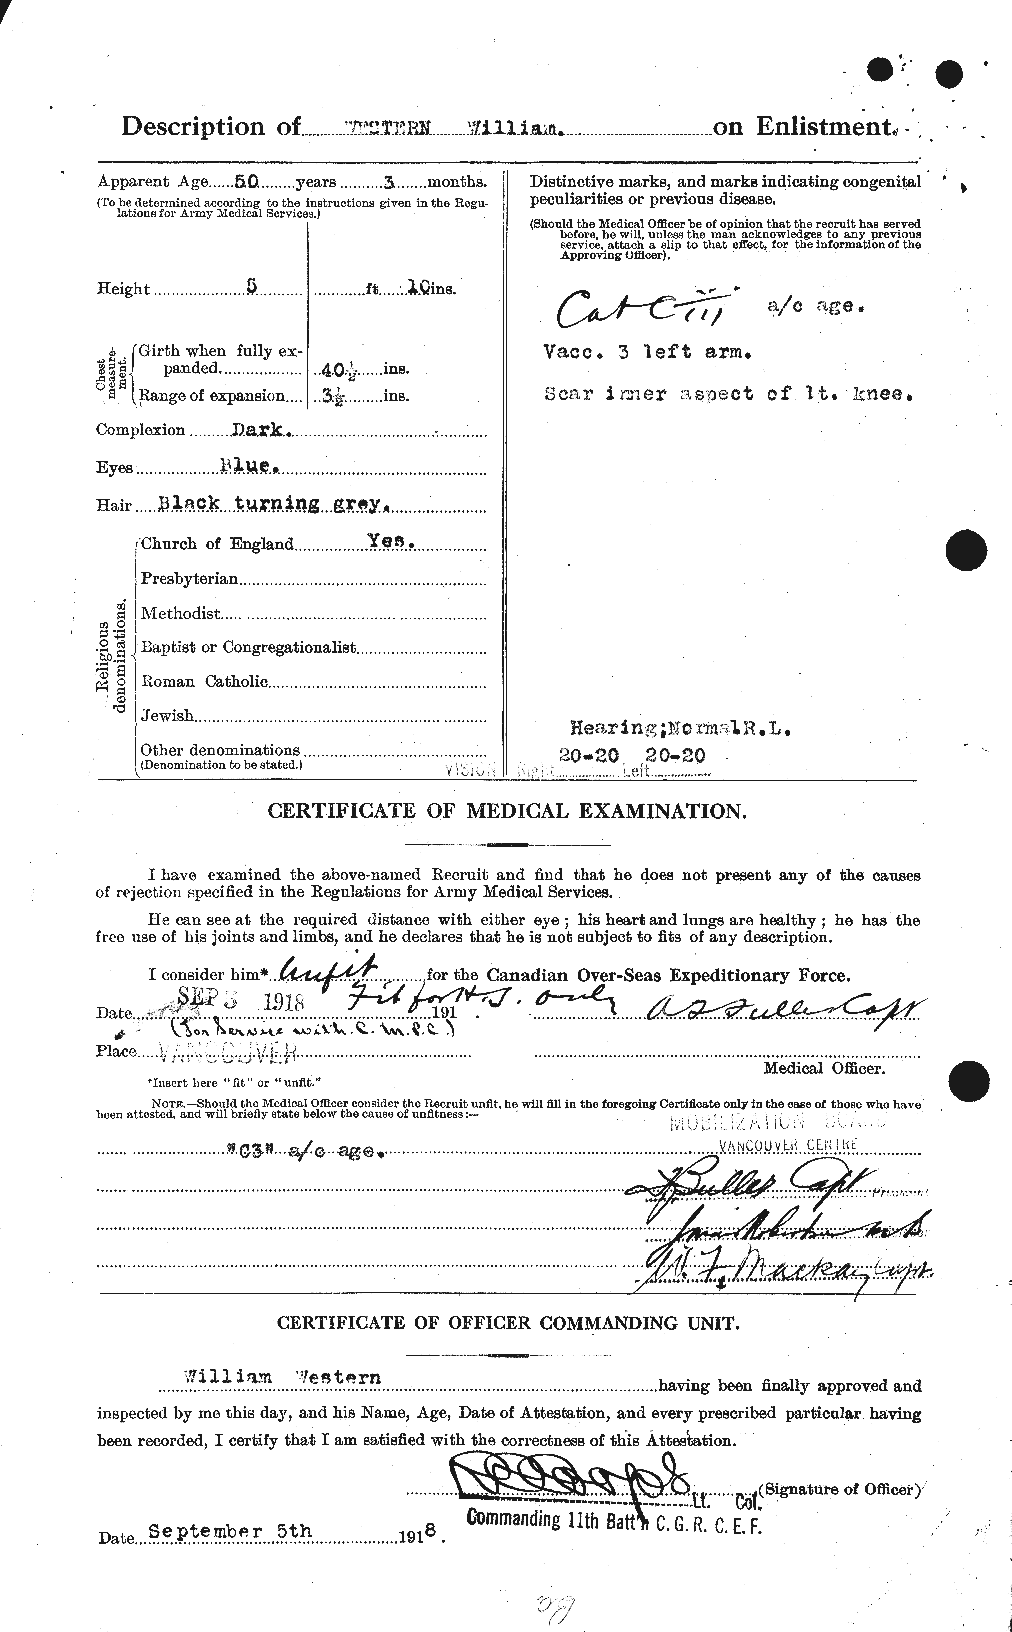 Personnel Records of the First World War - CEF 668180b